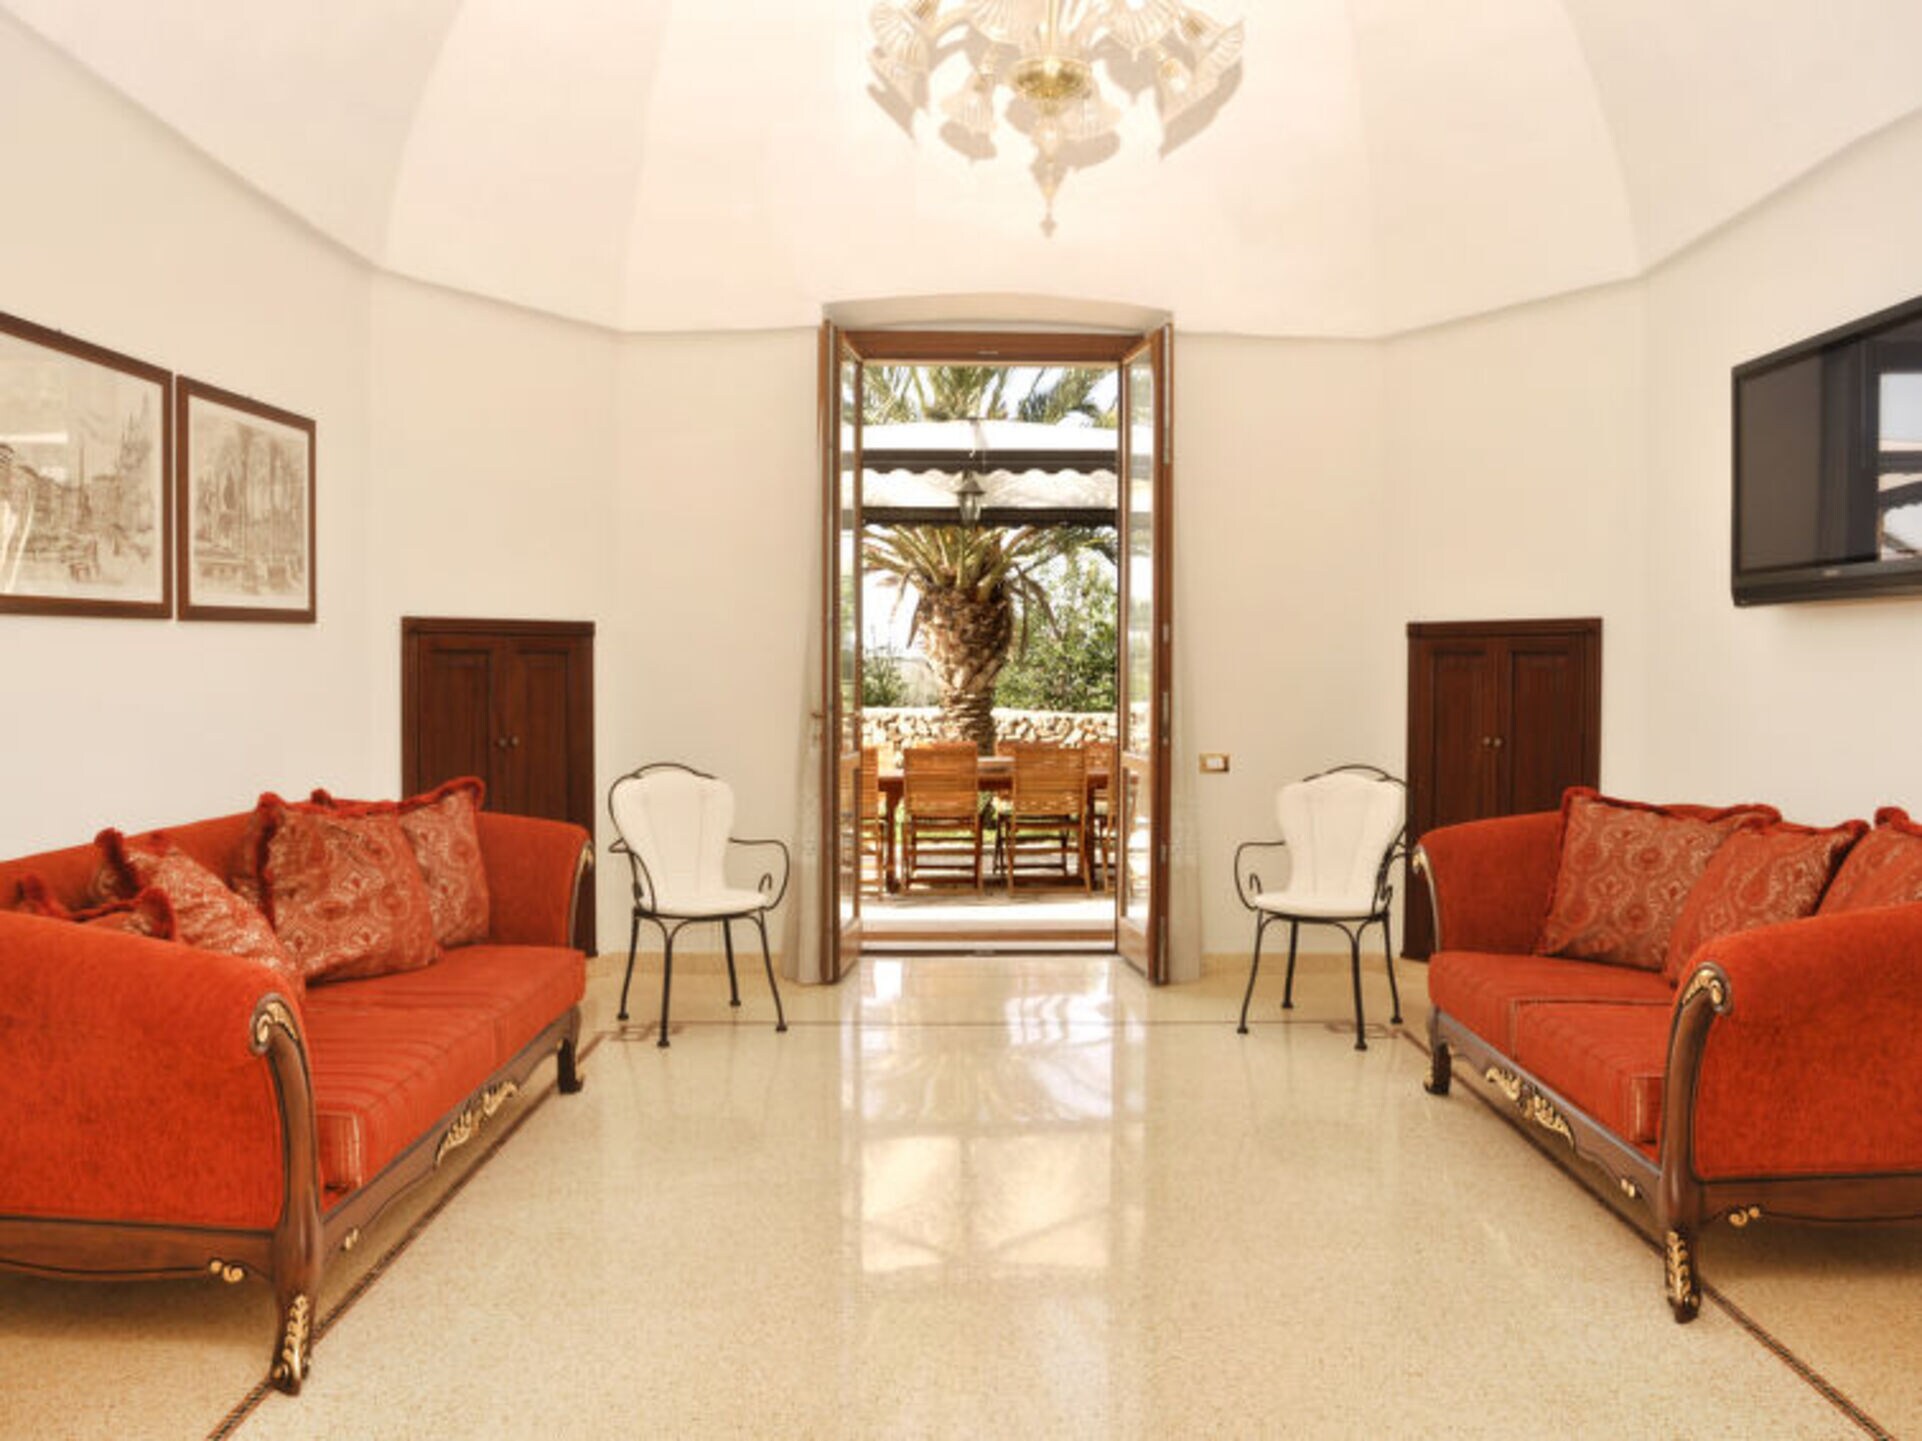 Property Image 2 - Rent Your Own Luxury Villa with 5 Bedrooms, Salento Villa 1002